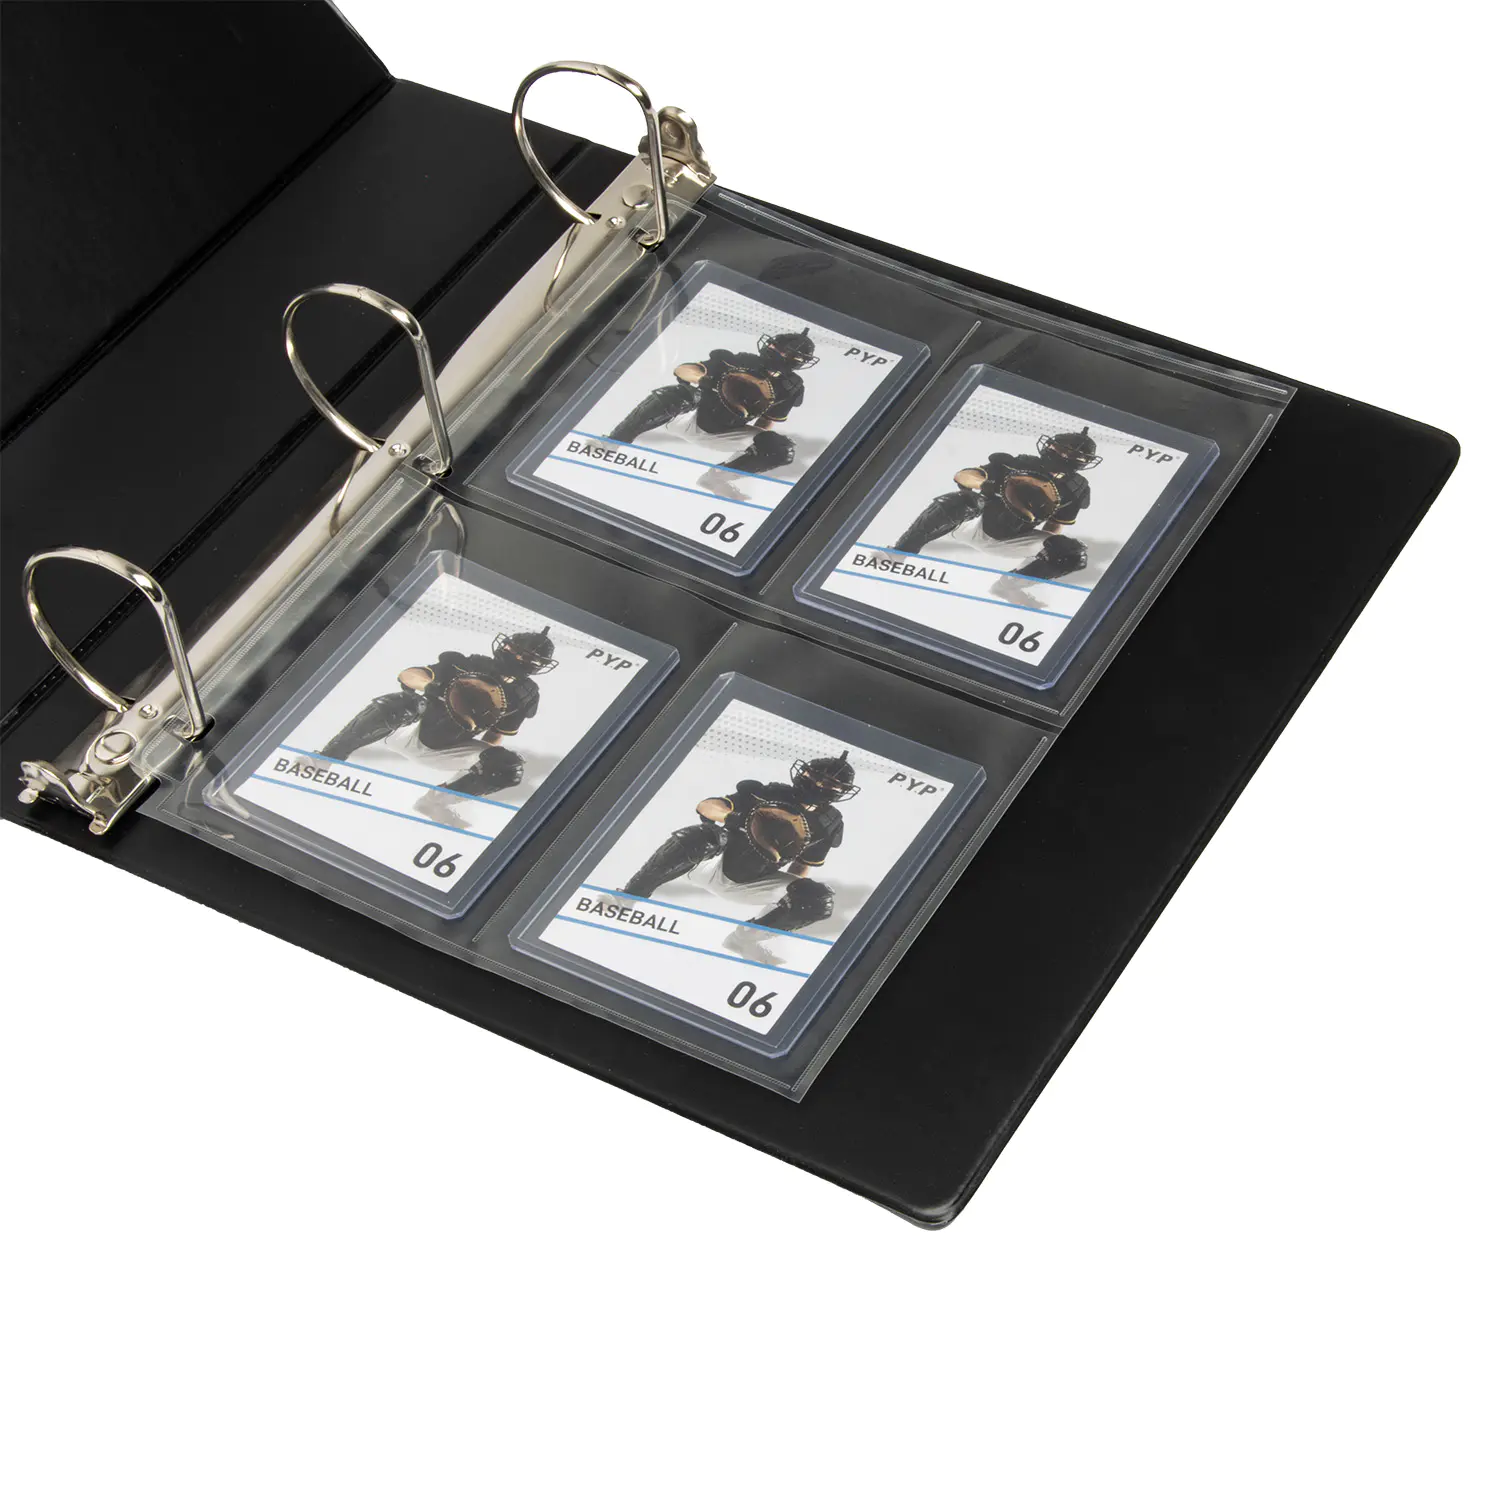 Premium Series 4-Pocket Secure Pages (100ct) for Toploaders